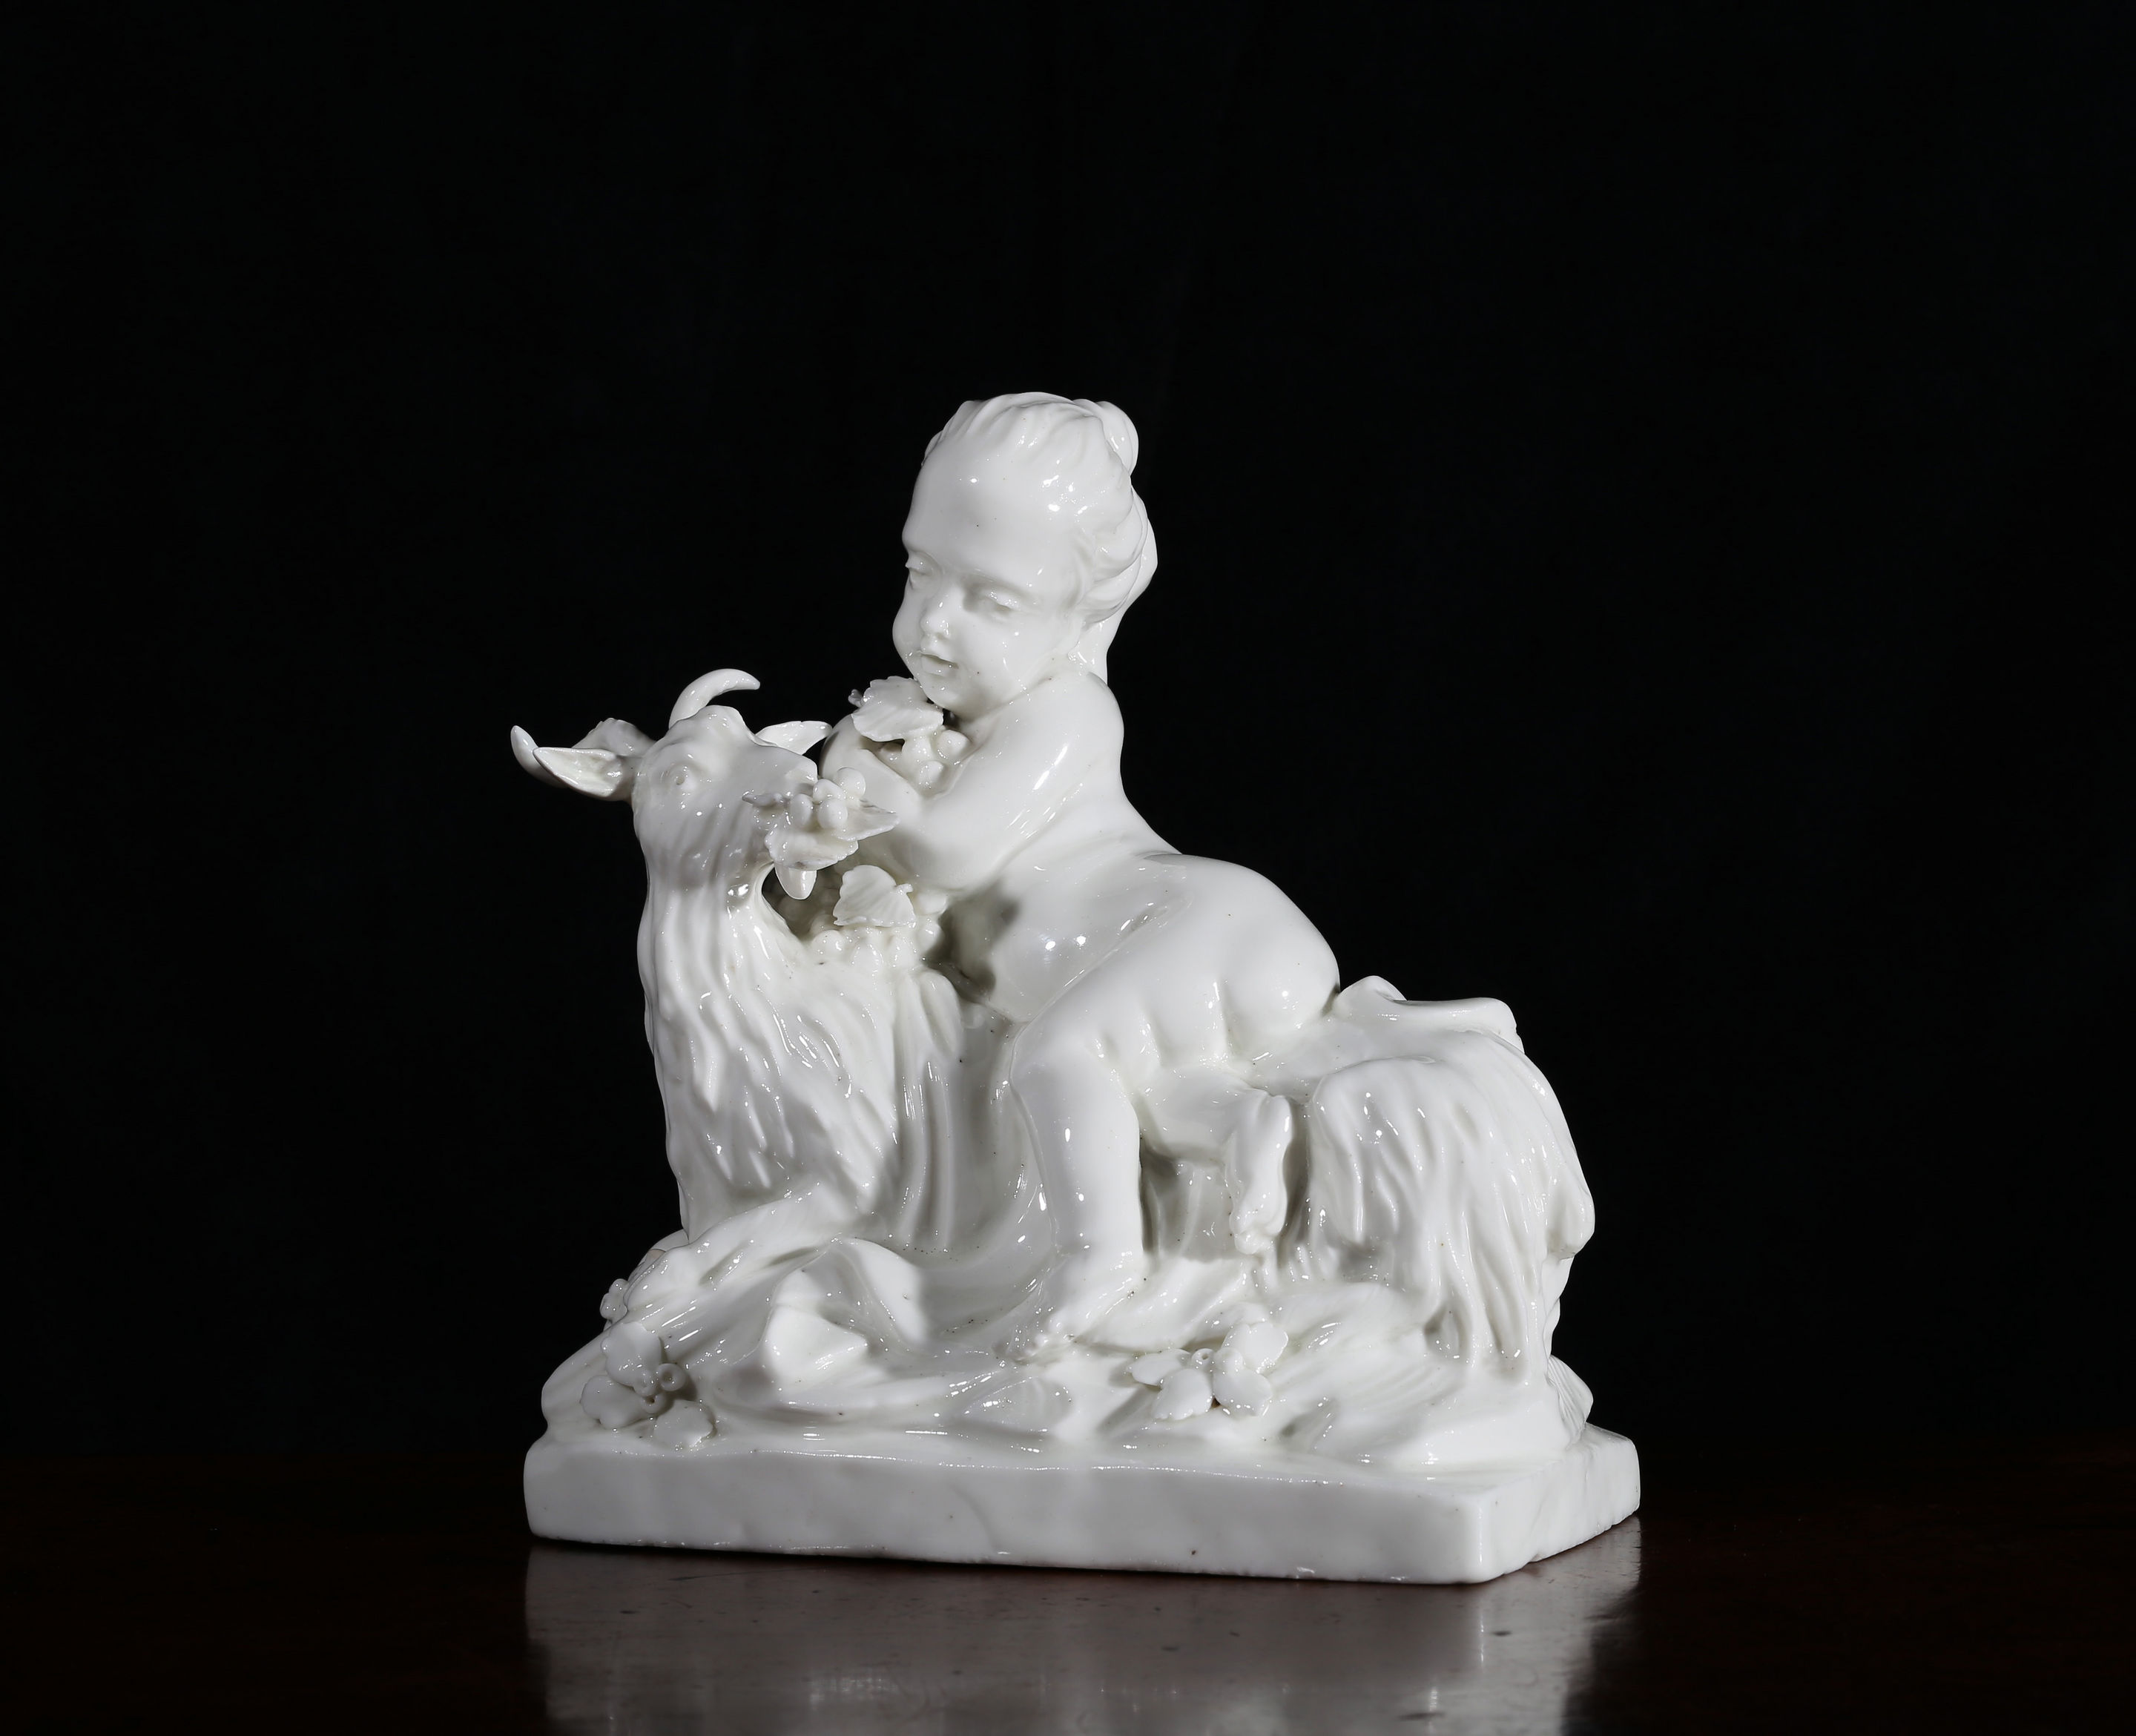 A white French figure of a child with a recumbent goat, probably Saint-Cloud